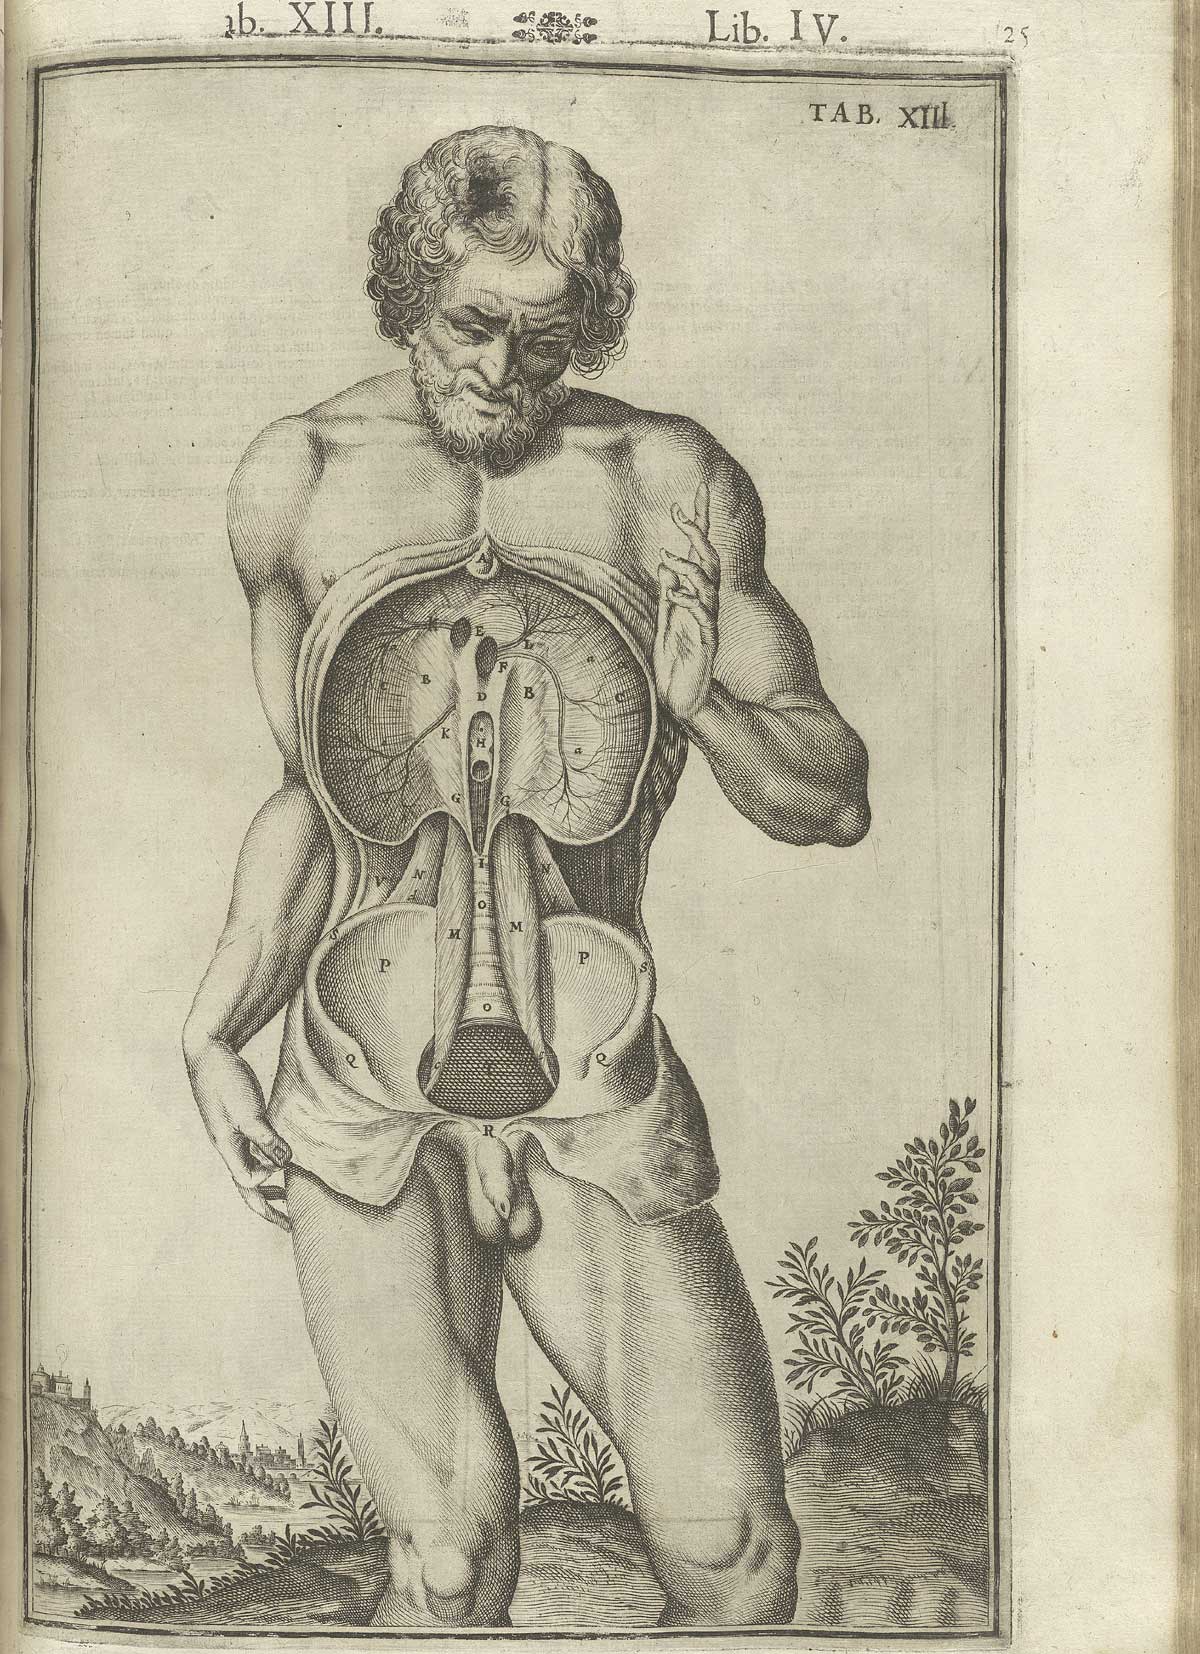 Engraving showing a nude bearded male anatomical figure in a pastoral setting facing forward with flayed abdomen emptied of its internal organs revealing the diaphragm below and the top of the pelvis; from Adriaan van de Spiegel and Giulio Cassieri’s De humani corporis fabrica libri decem, Venice, 1627, NLM call no. WZ 250 S755dh 1627.